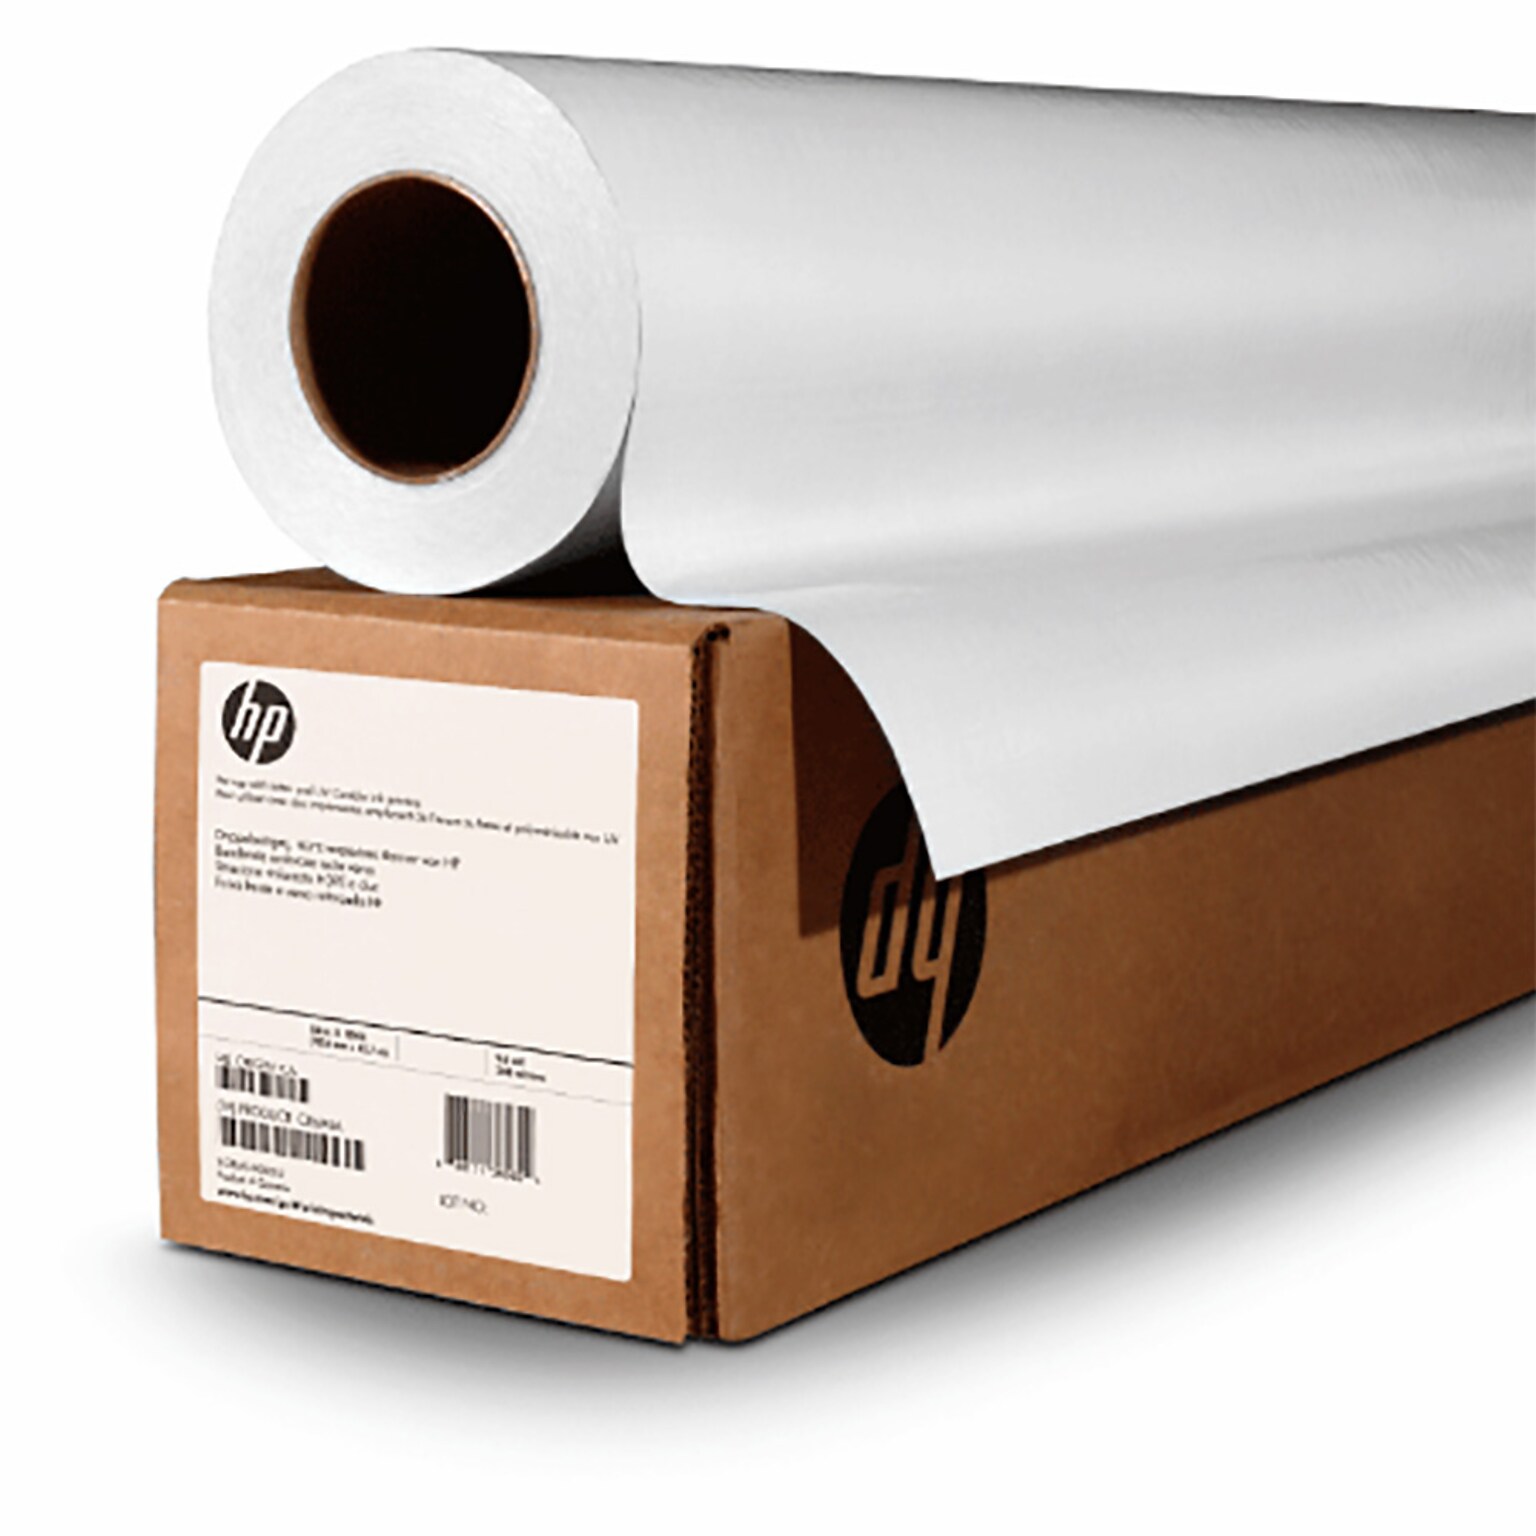 HP Universal Wide Format Removable Adhesive Paper, 54 x 100, Matte Finish (8SU08A)